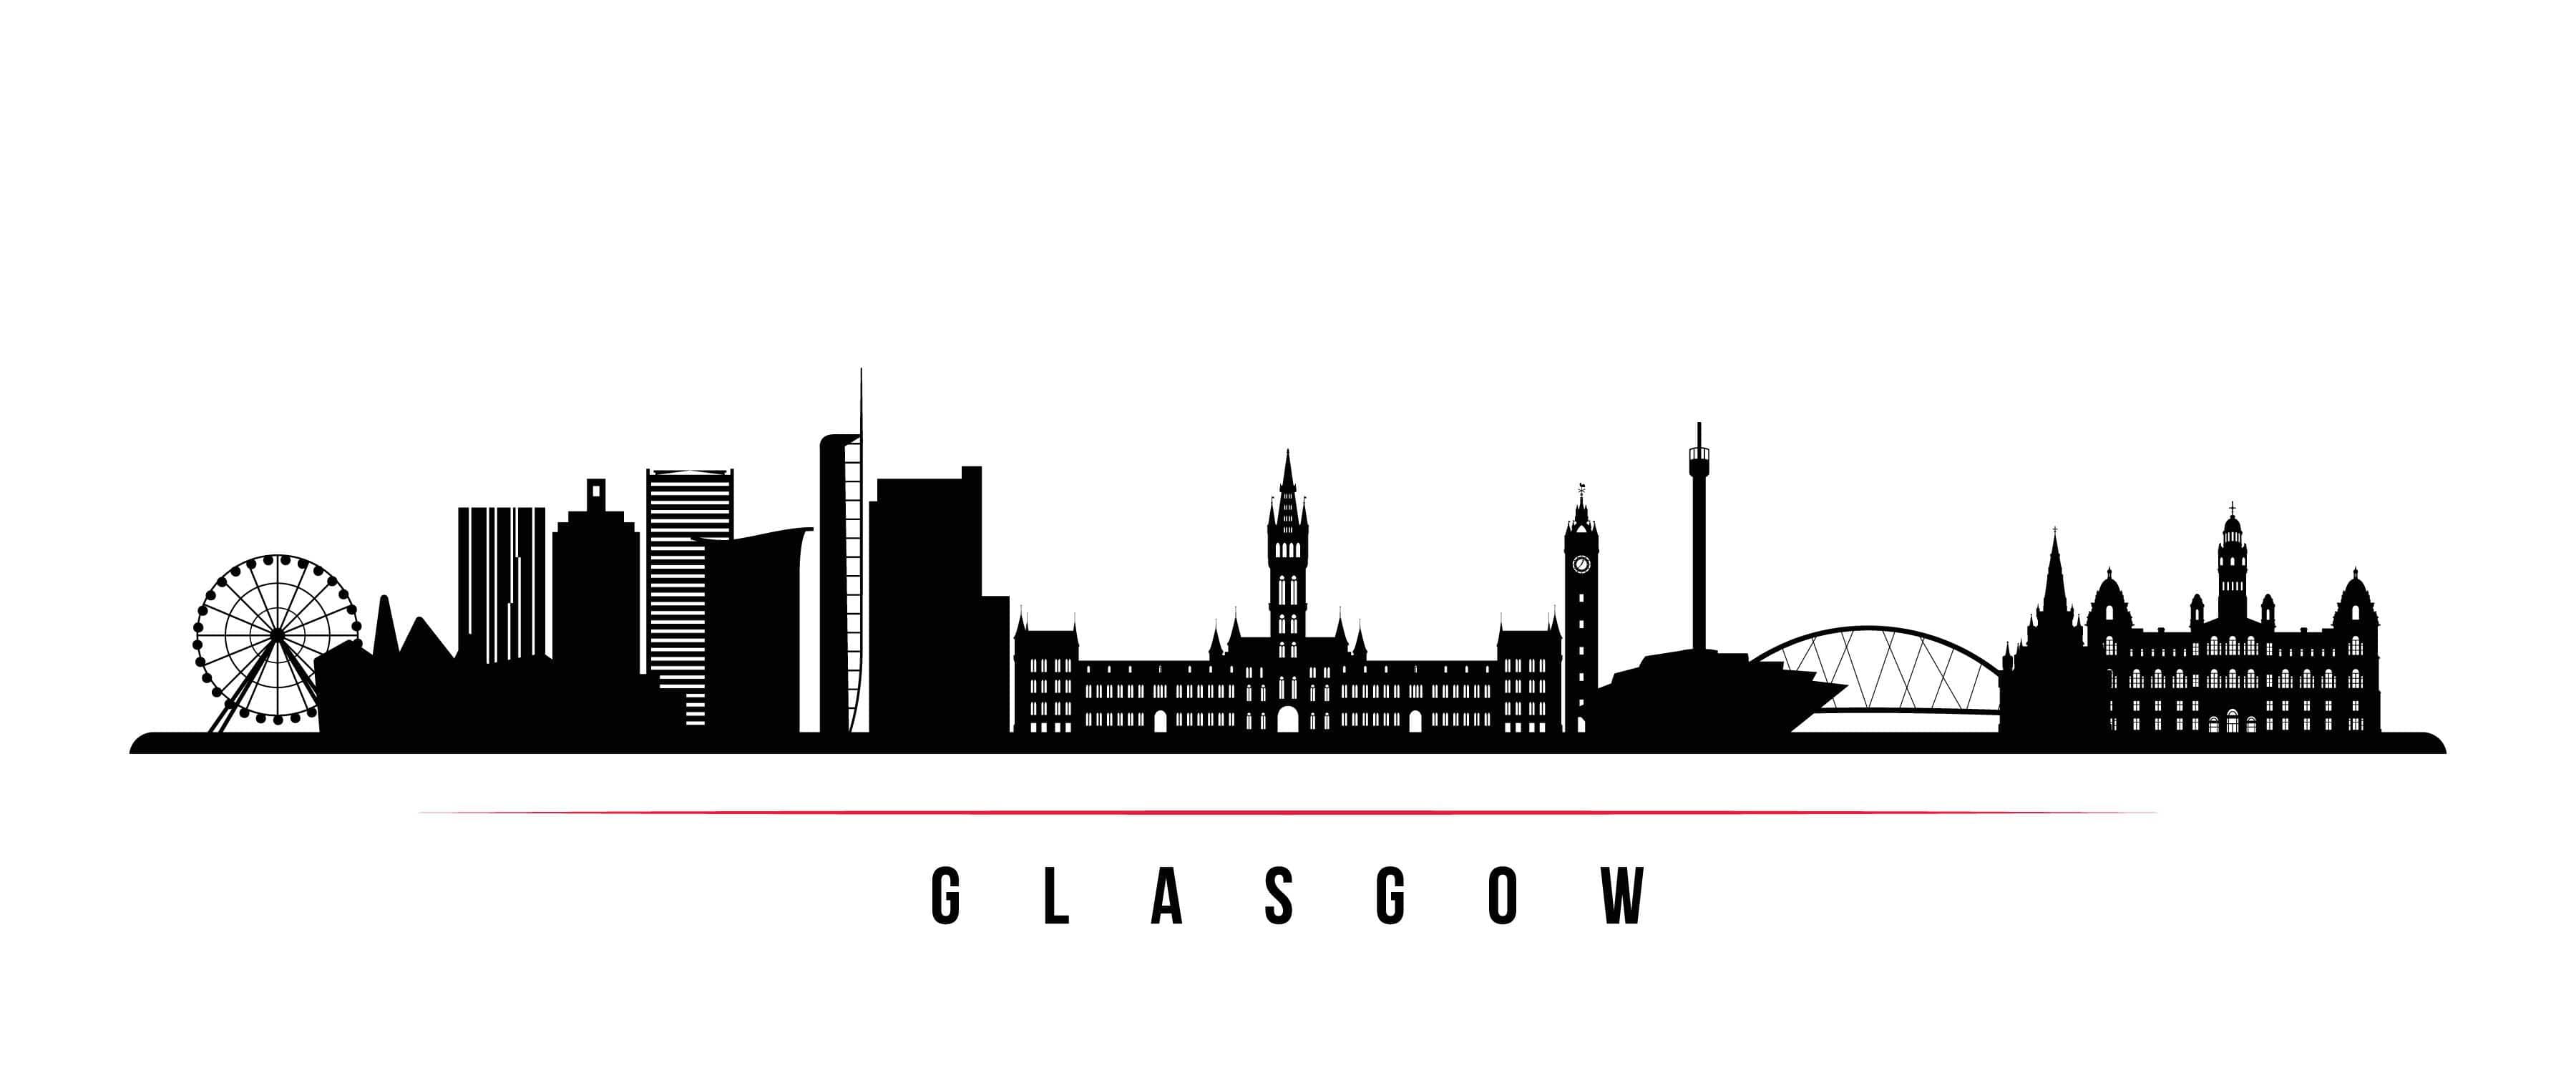 Student accommodation in Glasgow